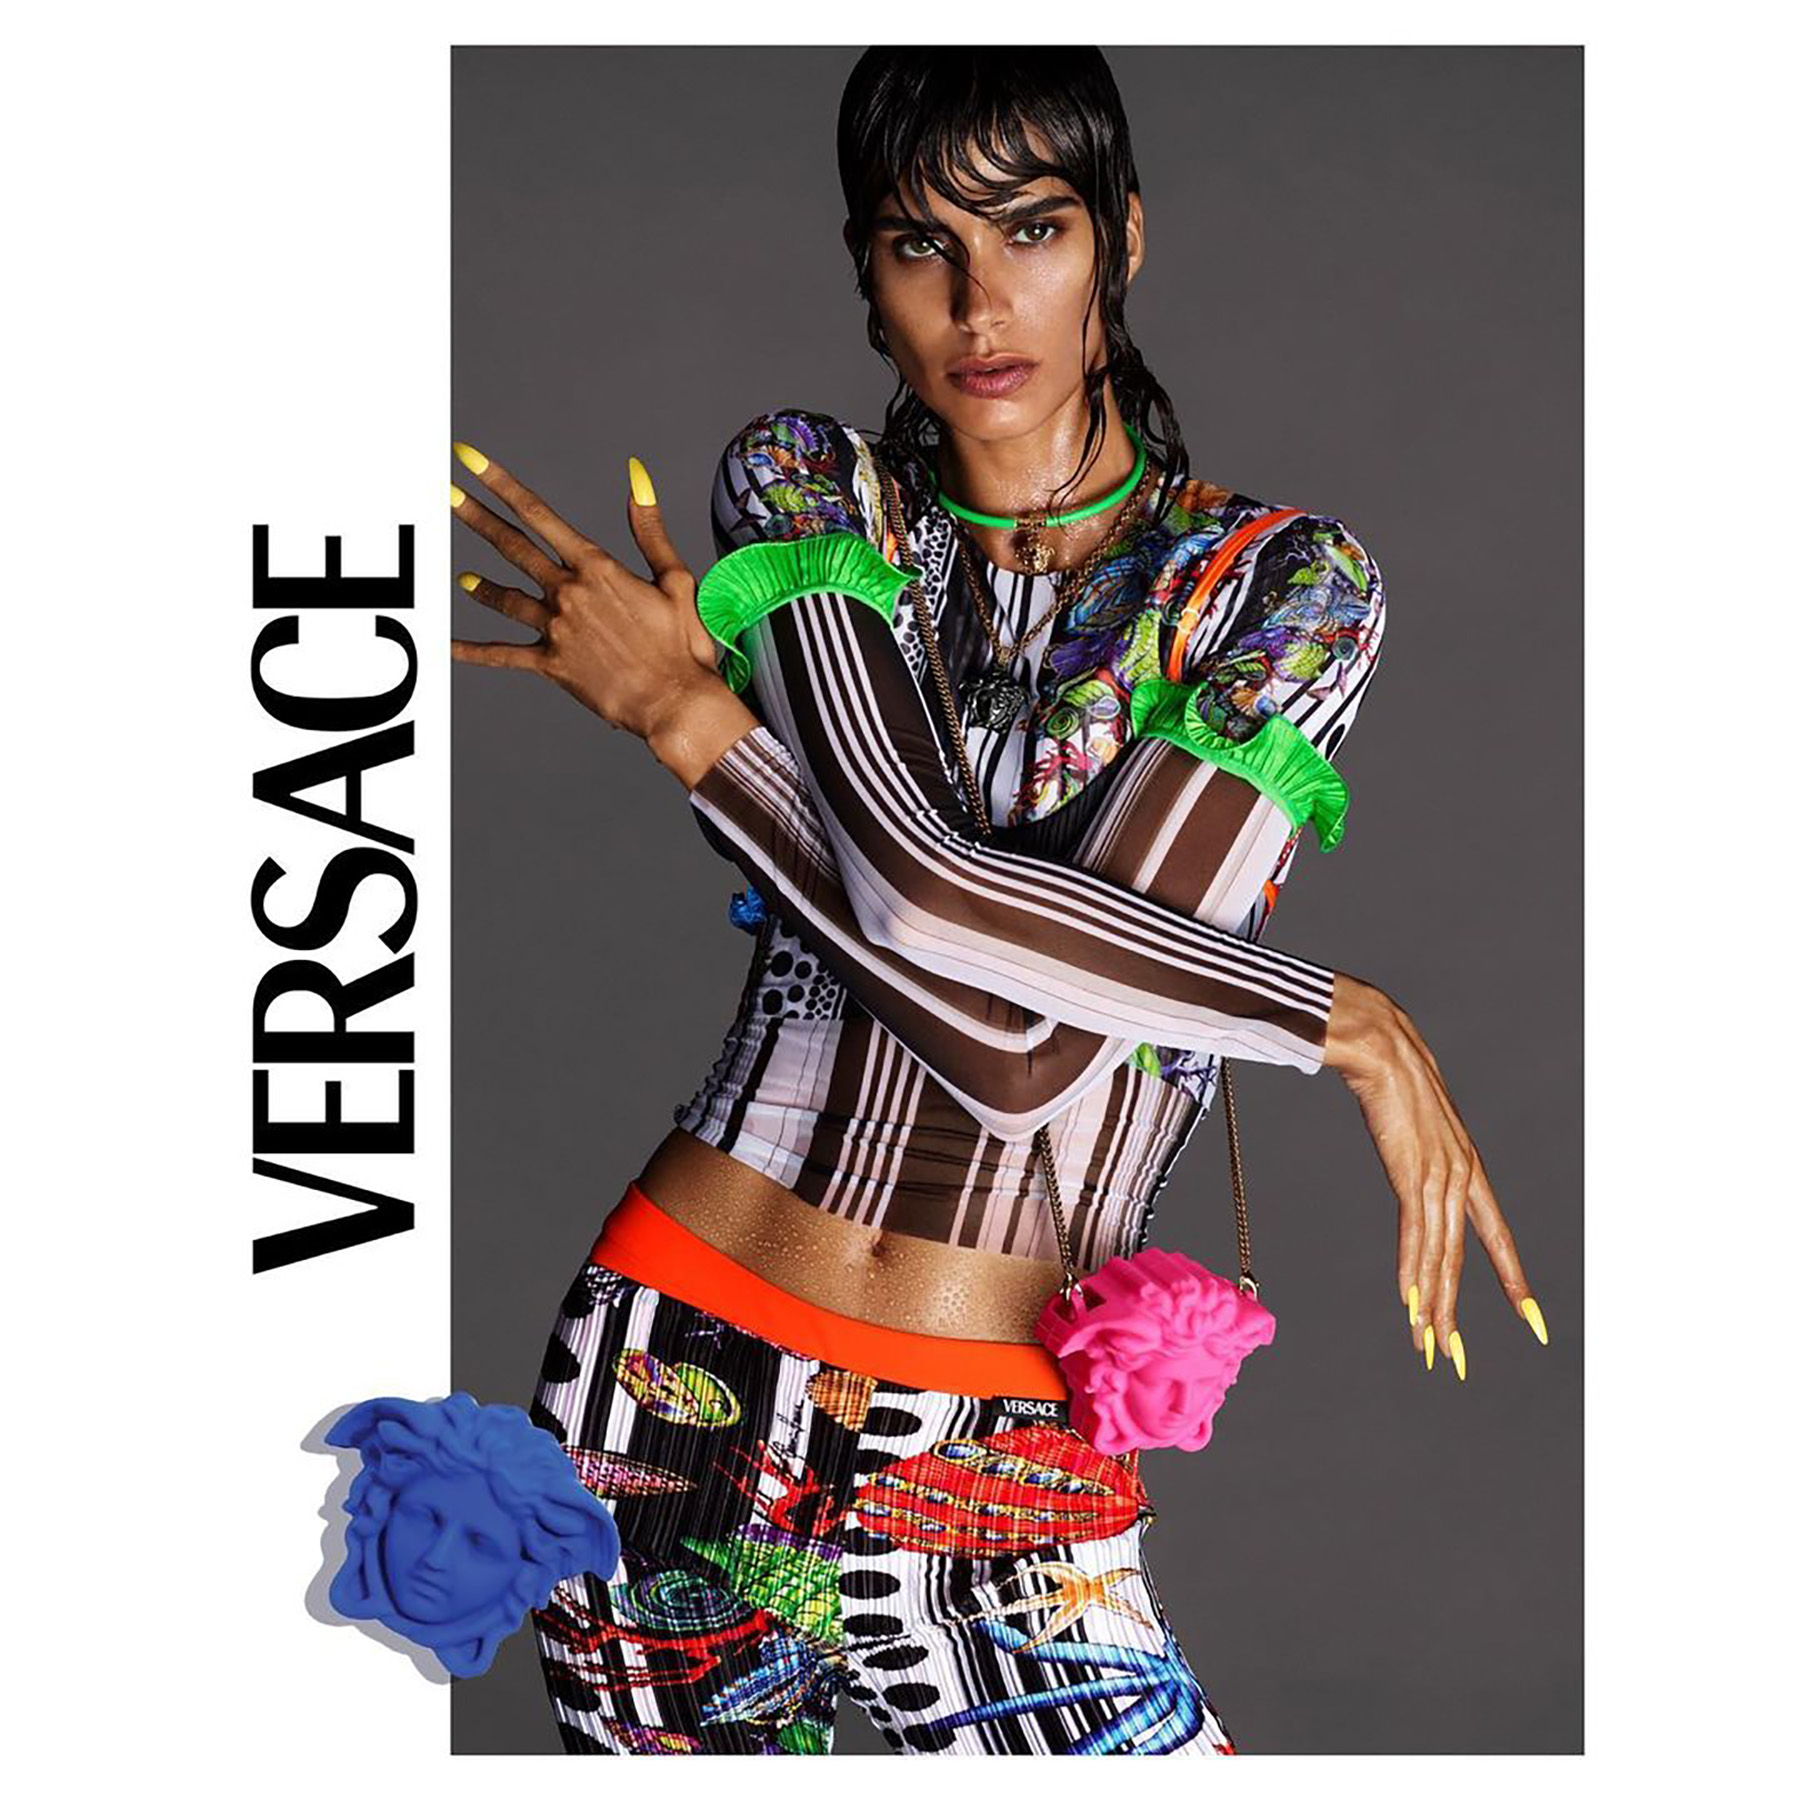 VERSACE SPRING-SUMMER 2021 CAMPAIGN: Welcome to Versacepolis